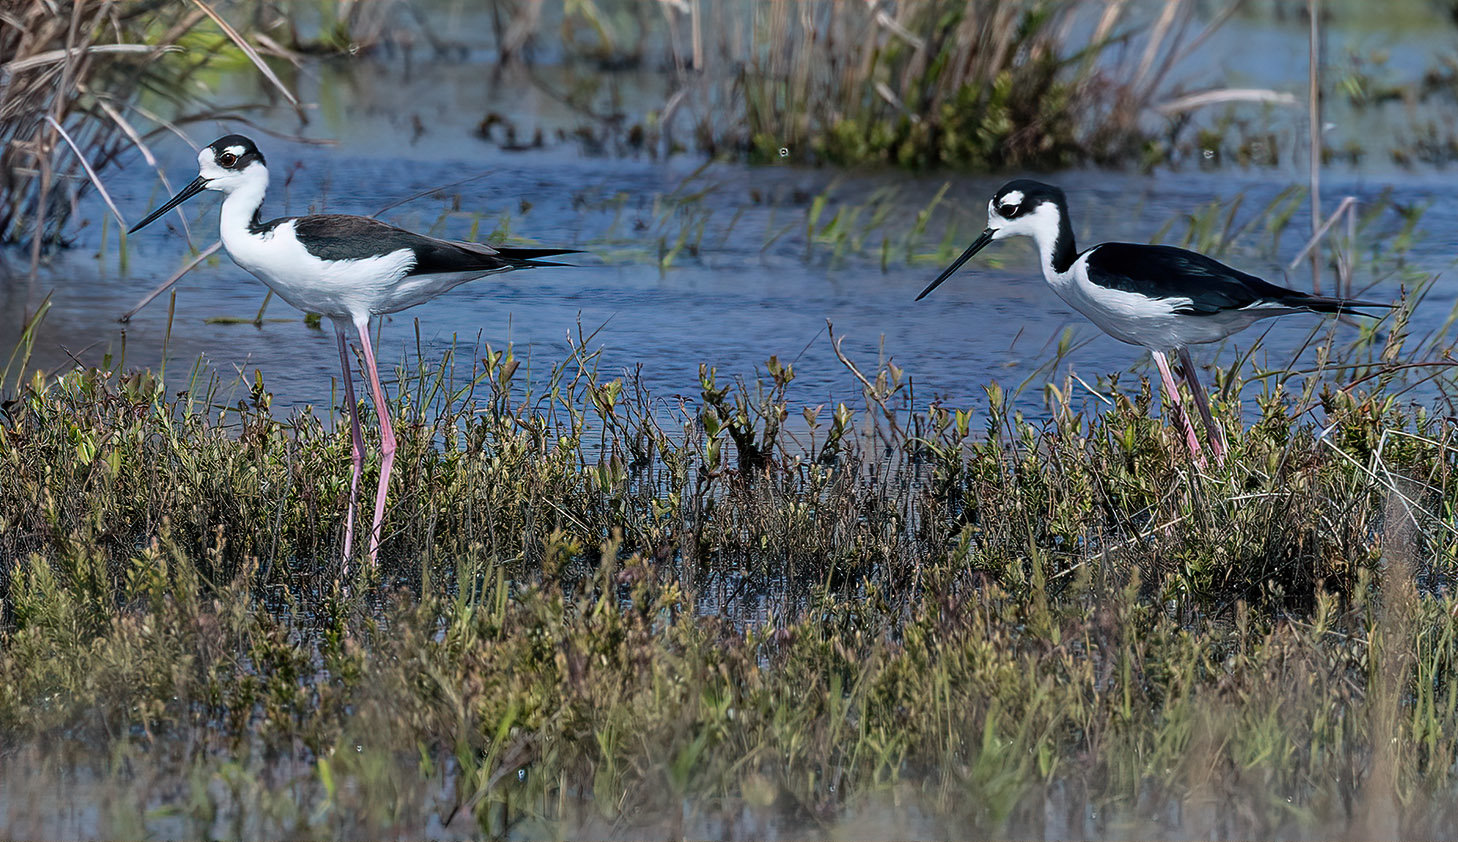 These two Black necked Stilts were a Bird-a-thon highlight this weekend.